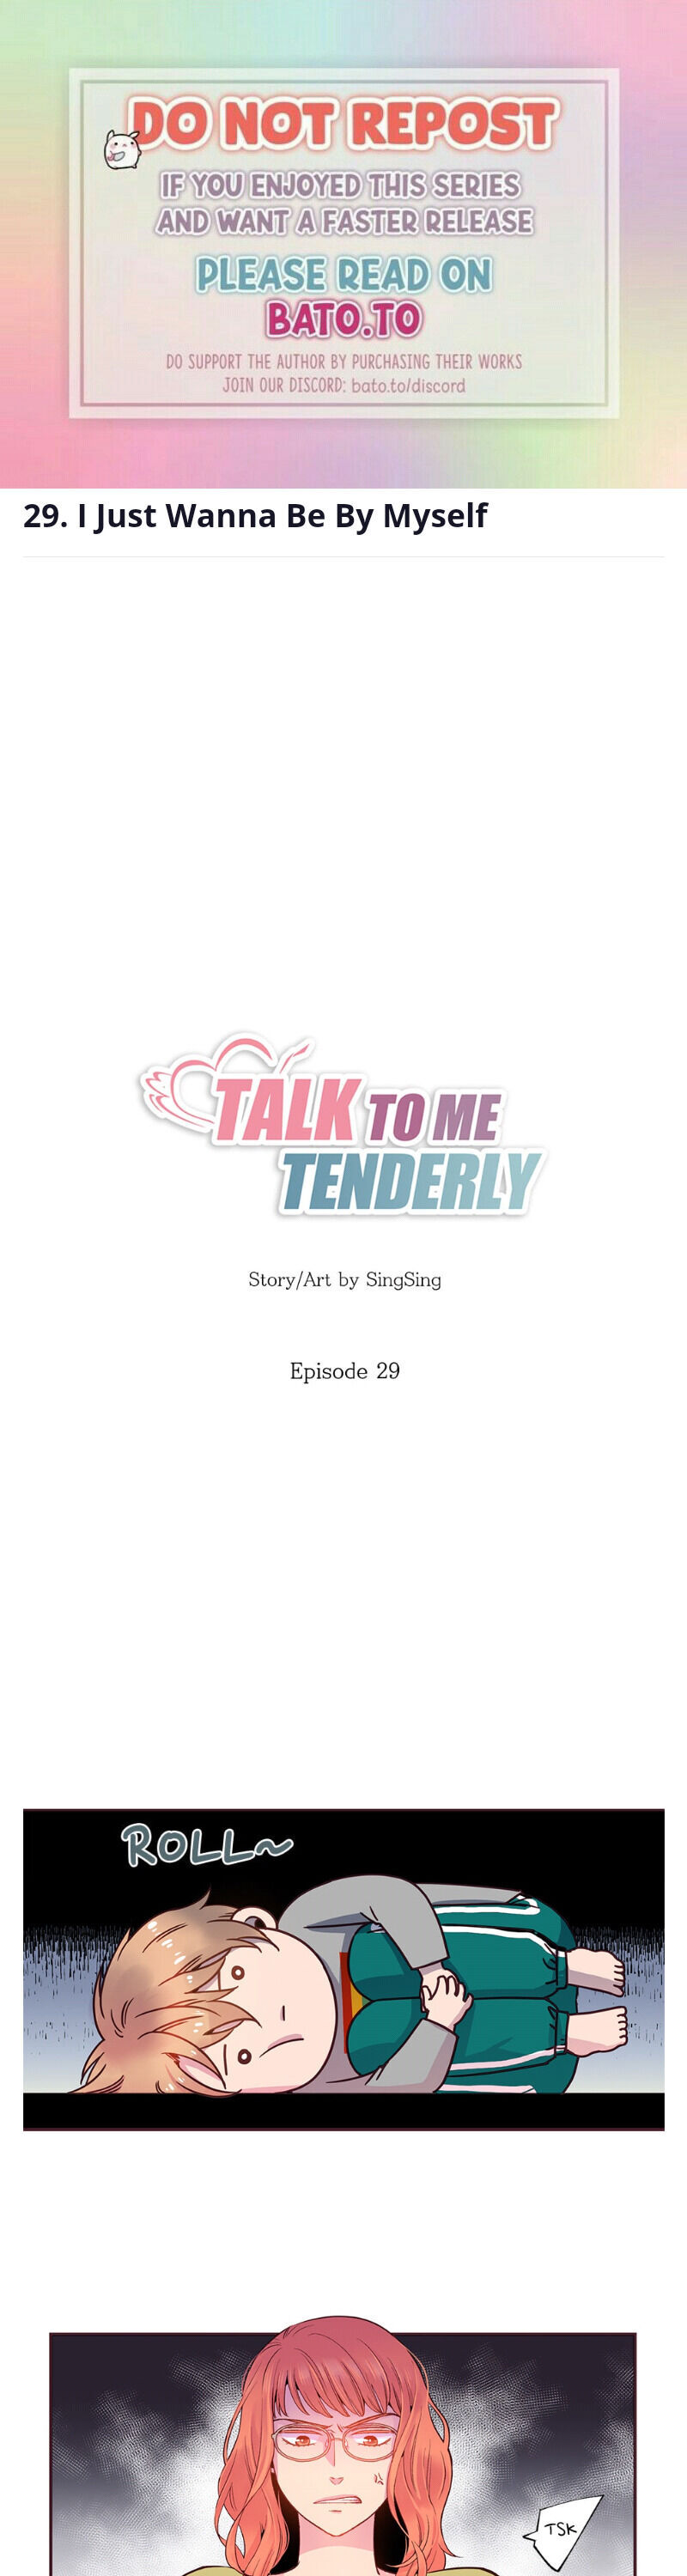 Talk To Me Tenderly - Page 1